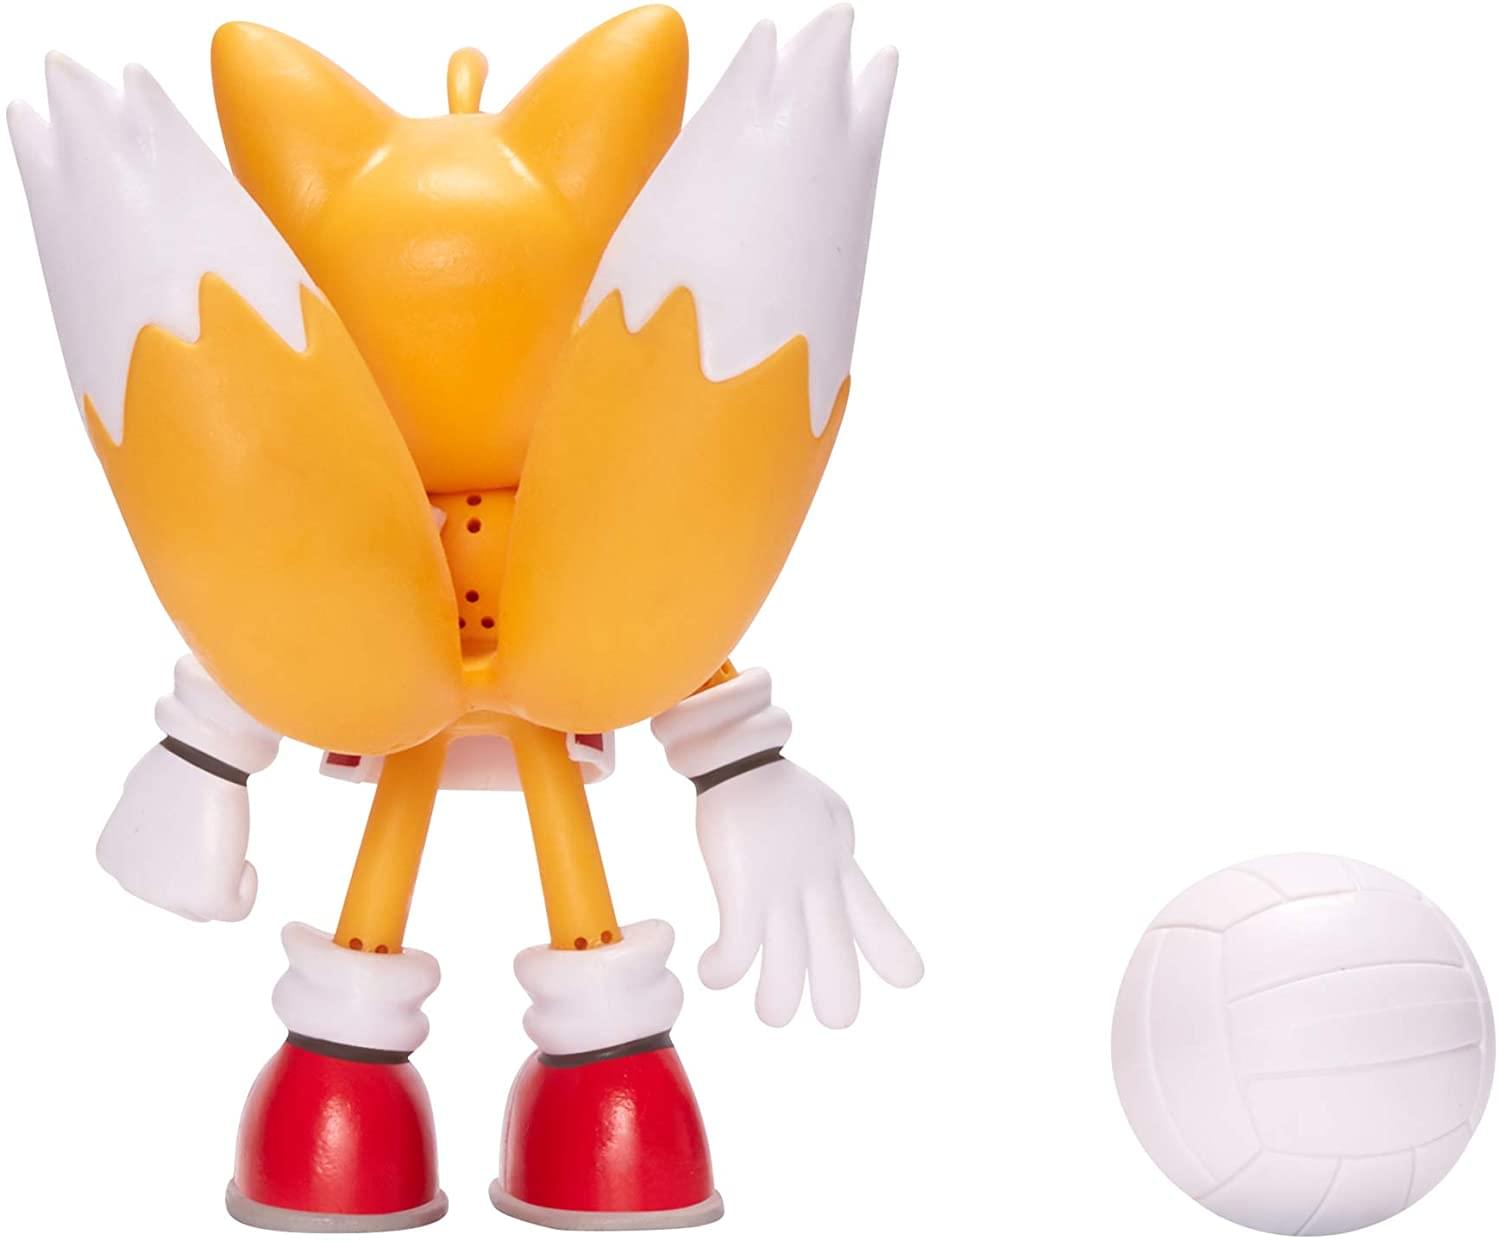 Sonic the Hedgehog 4 Inch Bendable Figure | Volleyball Tails